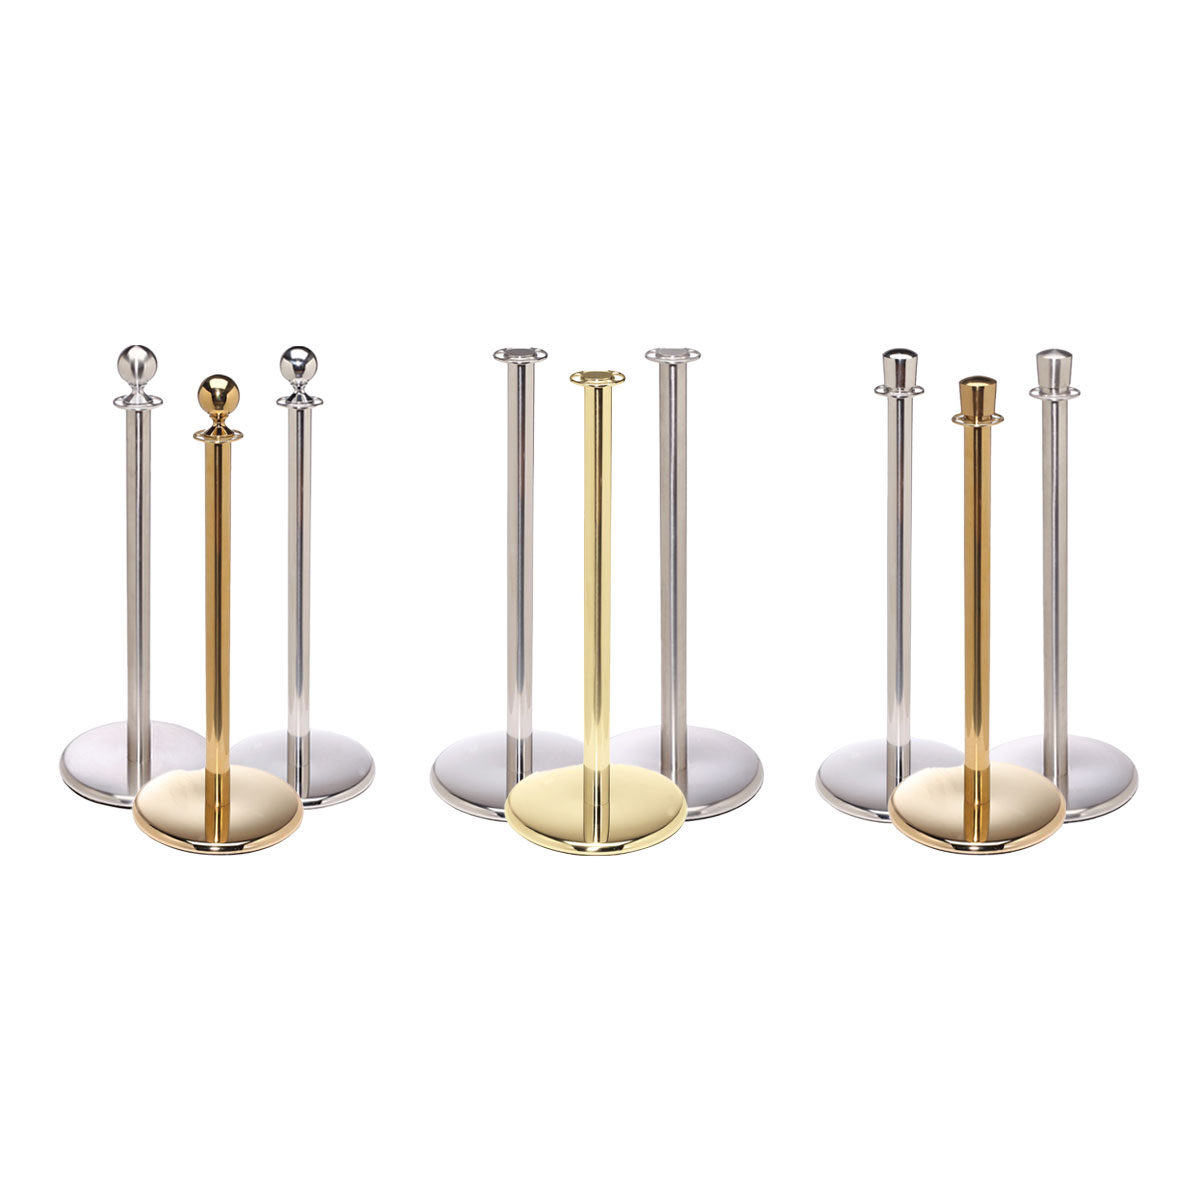 Elegance Pole And Rope Barriers